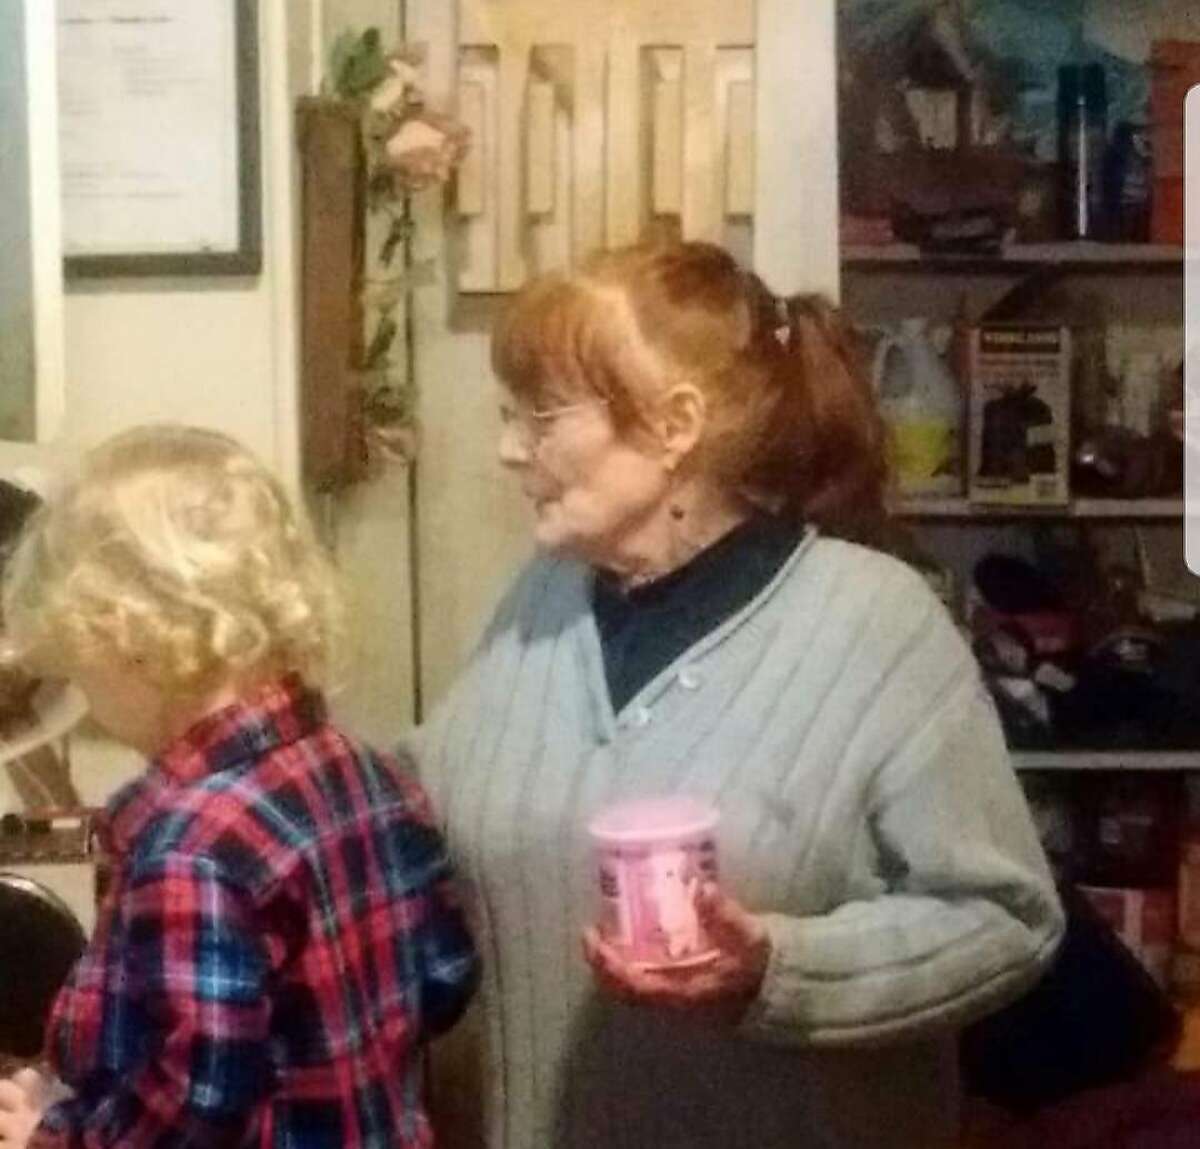 This photo shows Melody Bledsoe, 70, who is missing after the Carr Fire swept through her neighborhood and leveled her home. Courtesy Photo Bledsoe family